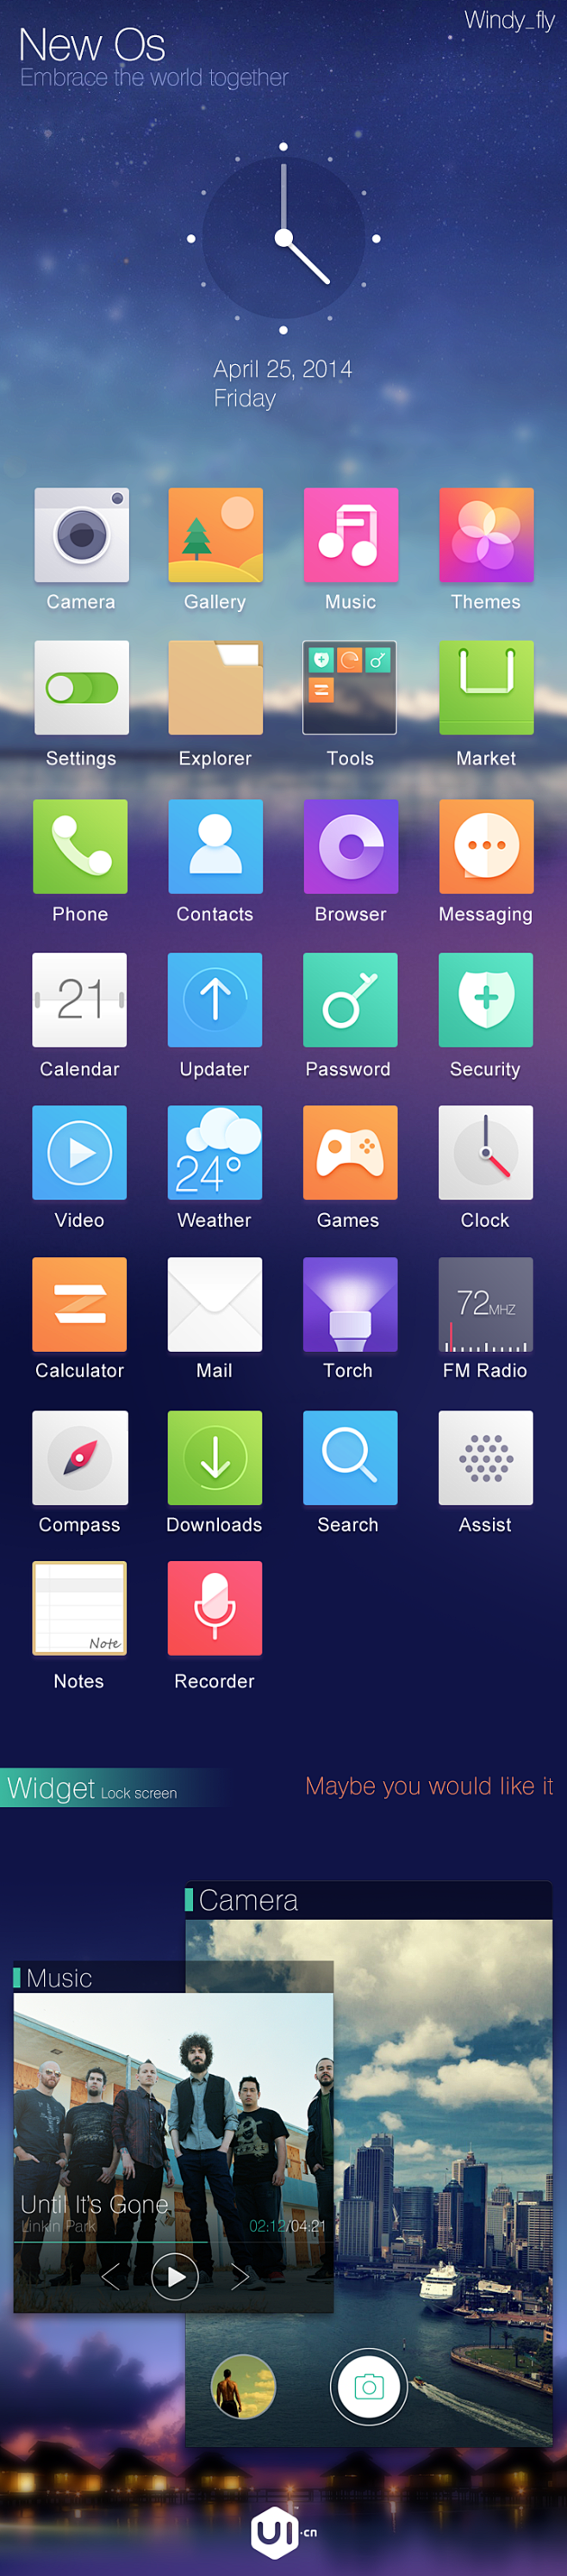 New OS for MIUI